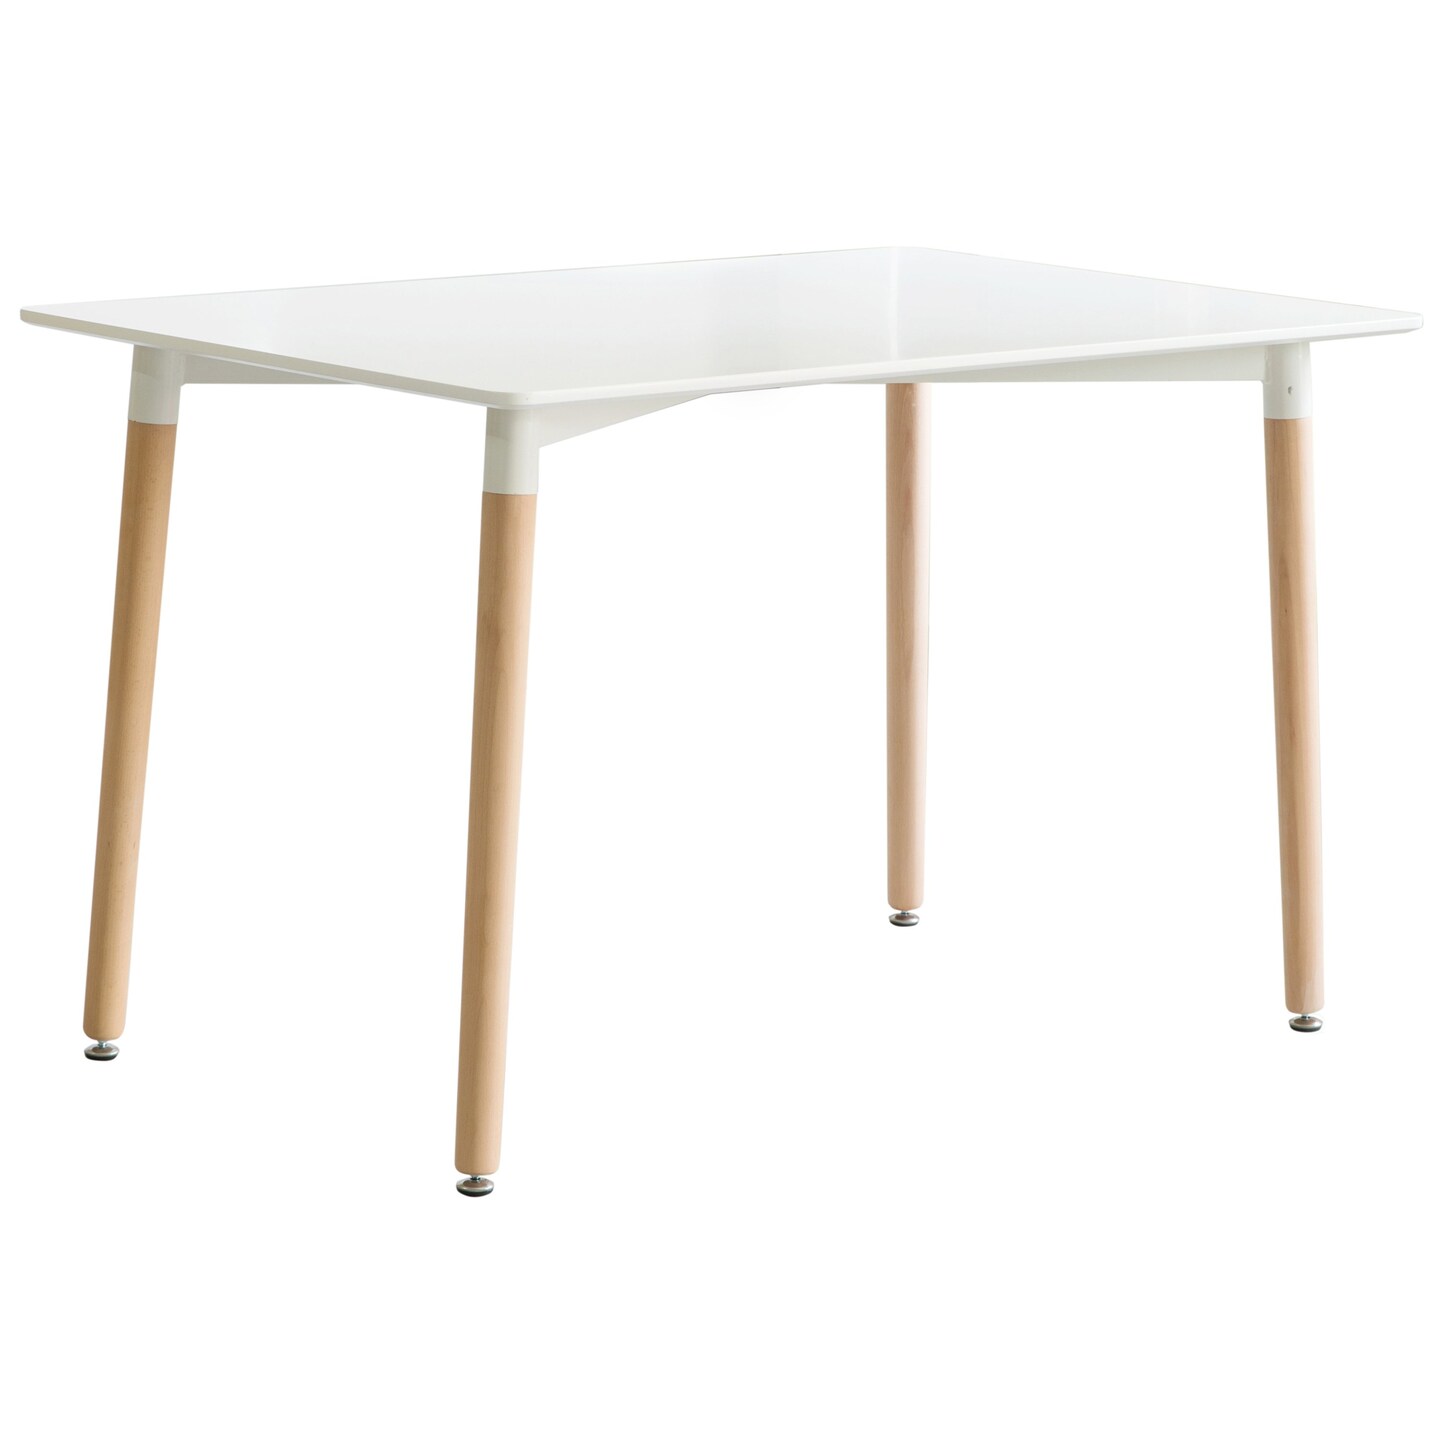 Fabulaxe Mid-Century Modern Rectangular 4 Ft. Dining Table with White Tabletop and Solid Beech Wood Legs